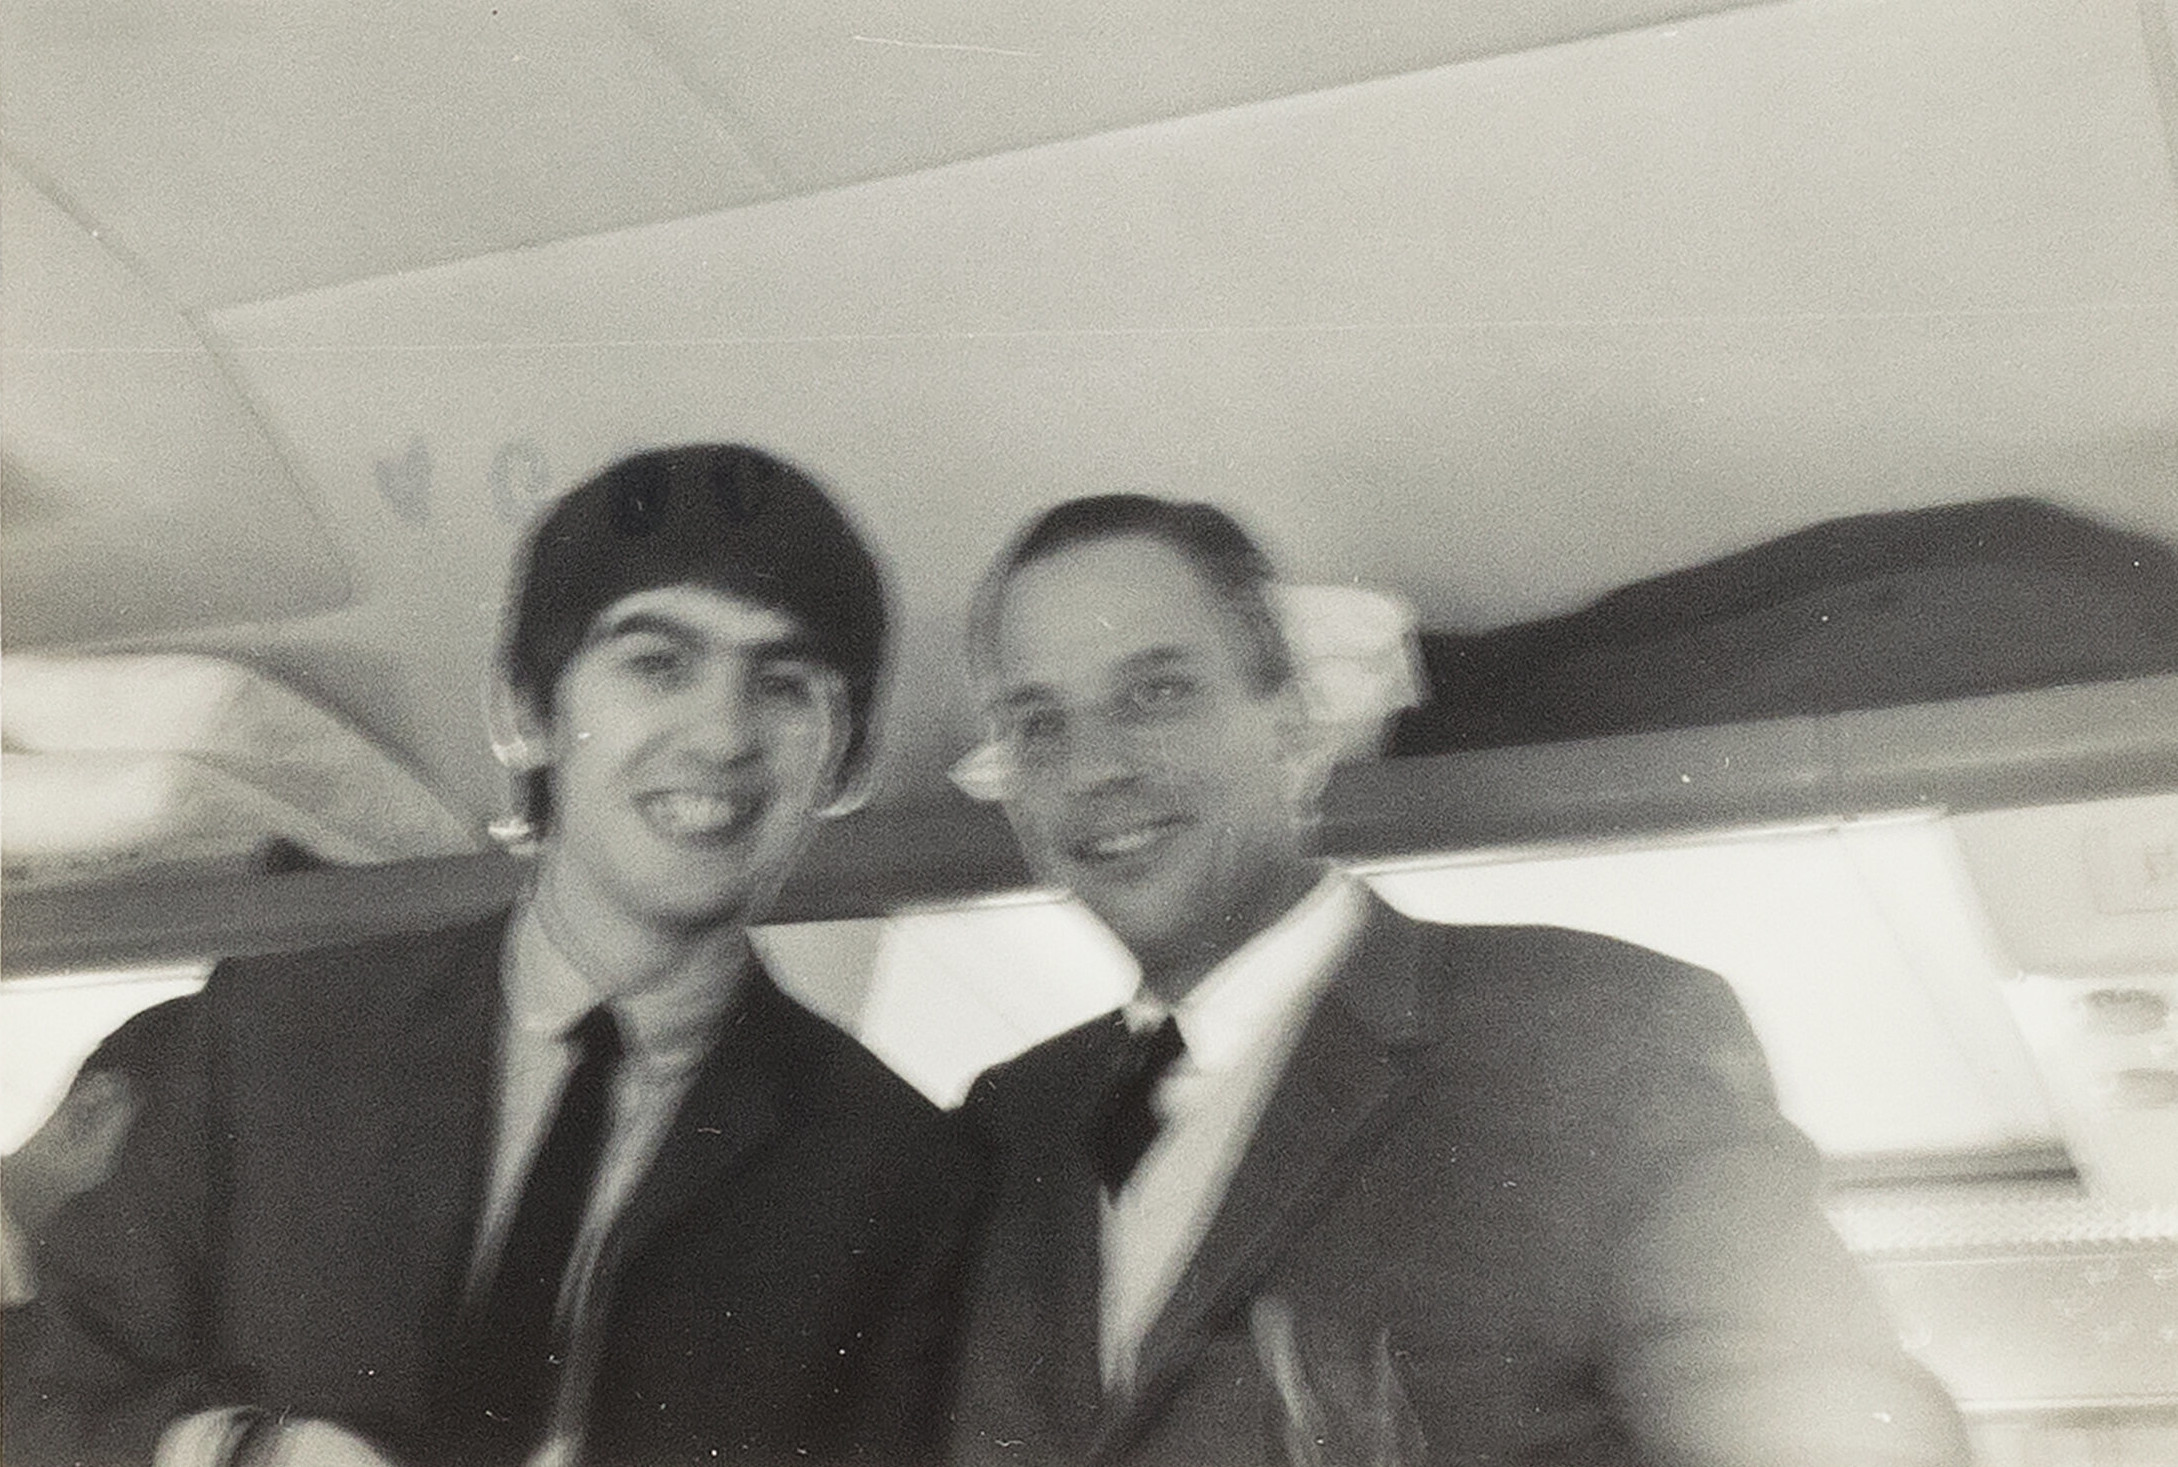 George Harrison of The Beatles with George Harrison, newspaper reporter, aboard a flight to New York in February 1964.